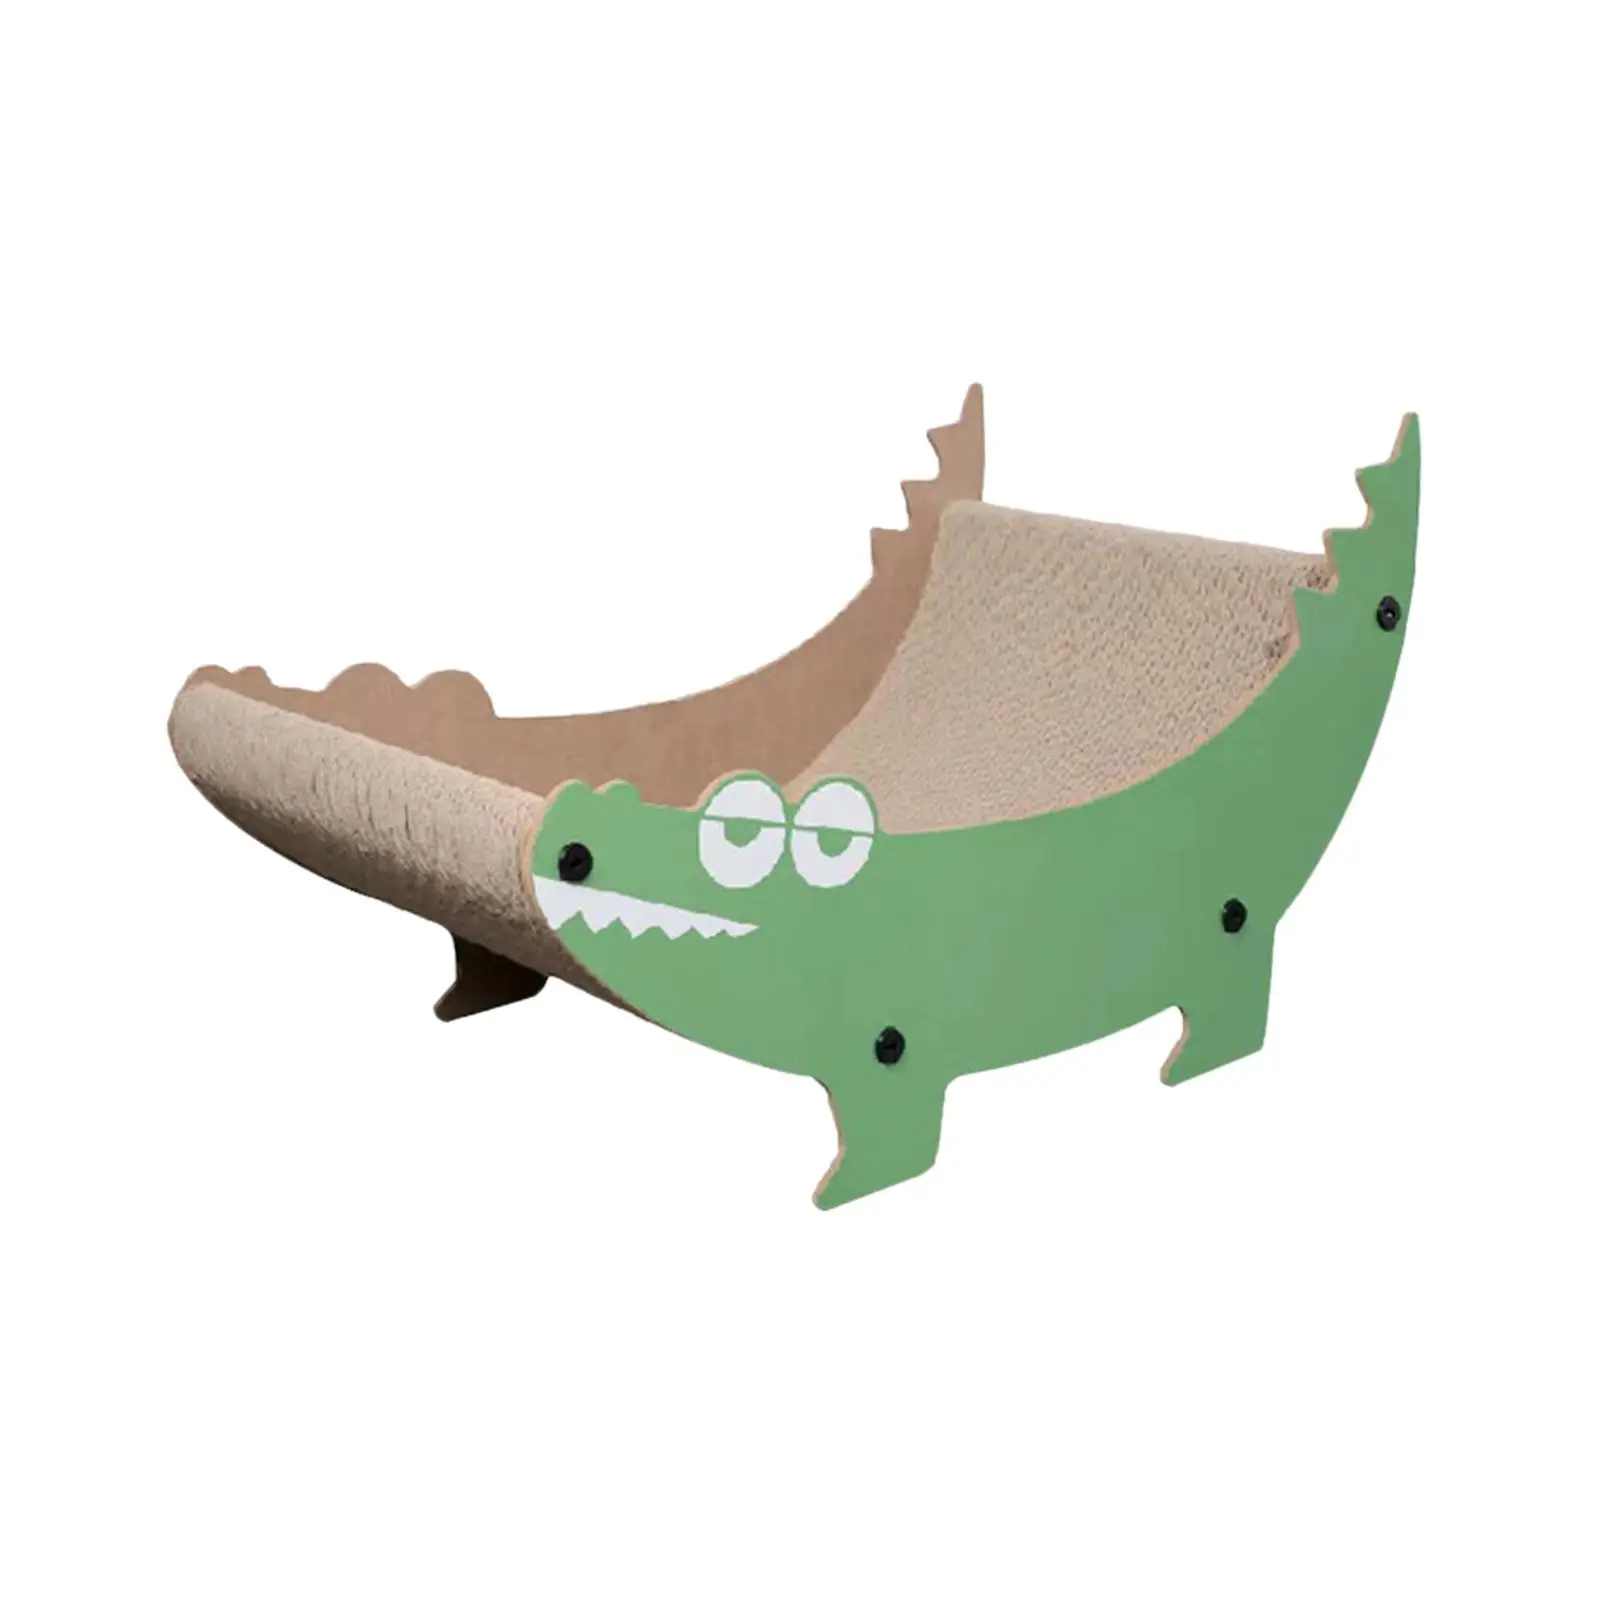 Cat Scratcher Cardboard Sofa Corrugated Scratch Pad Cat Scratching Lounge Bed for Playing Sleeping Grinding Claw Cats Scratching